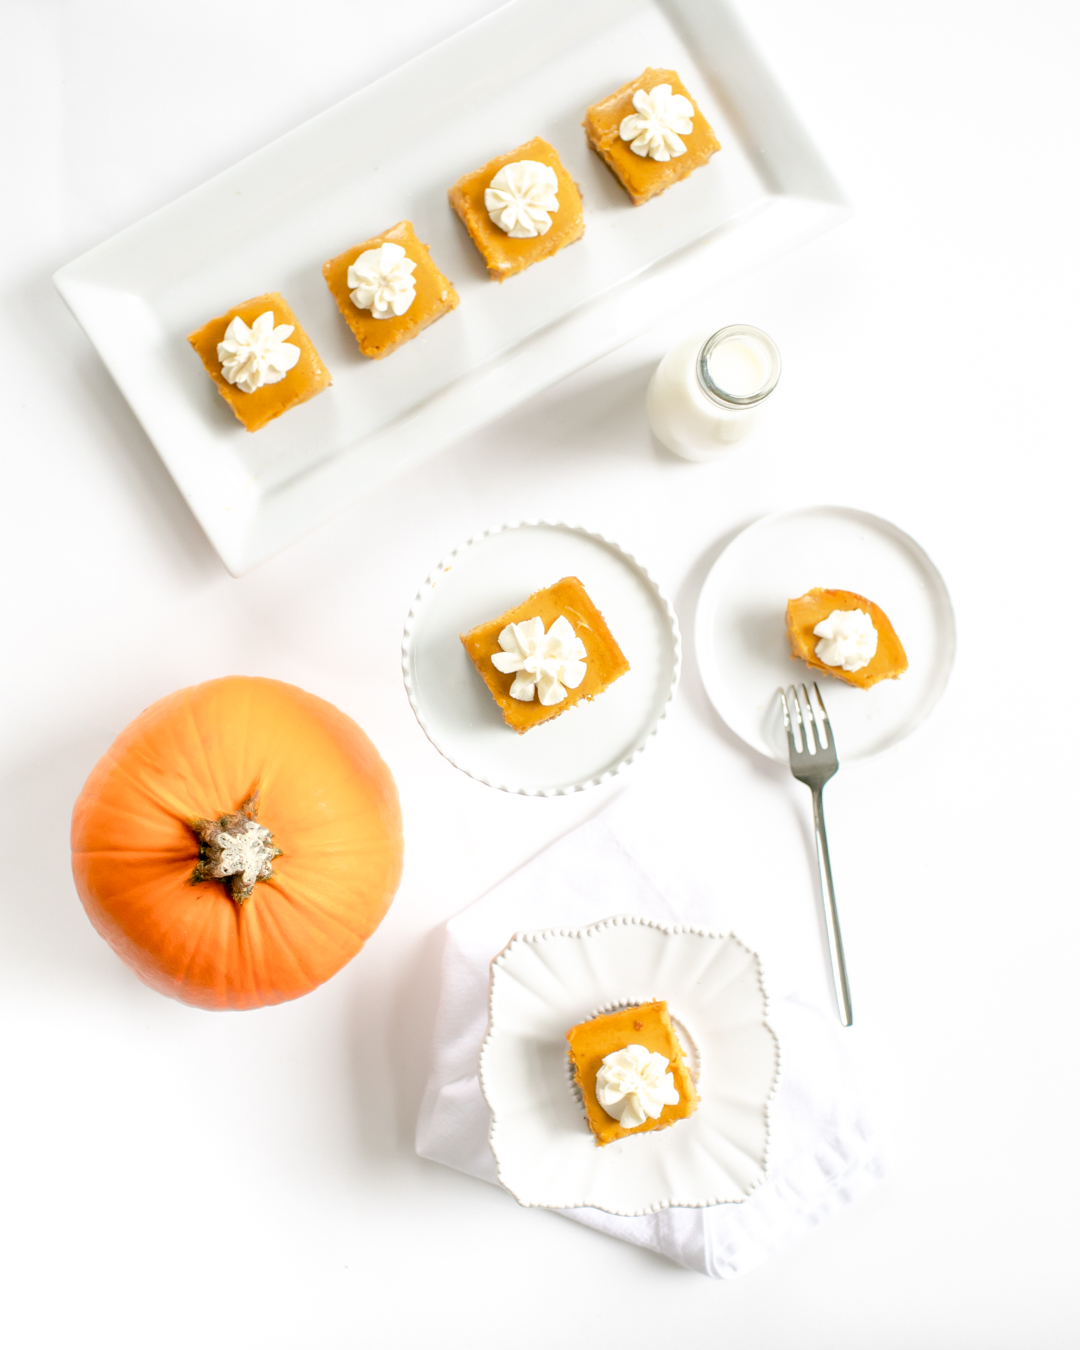 Pumpkin Cheesecake Squares with Maple Whipped Cream